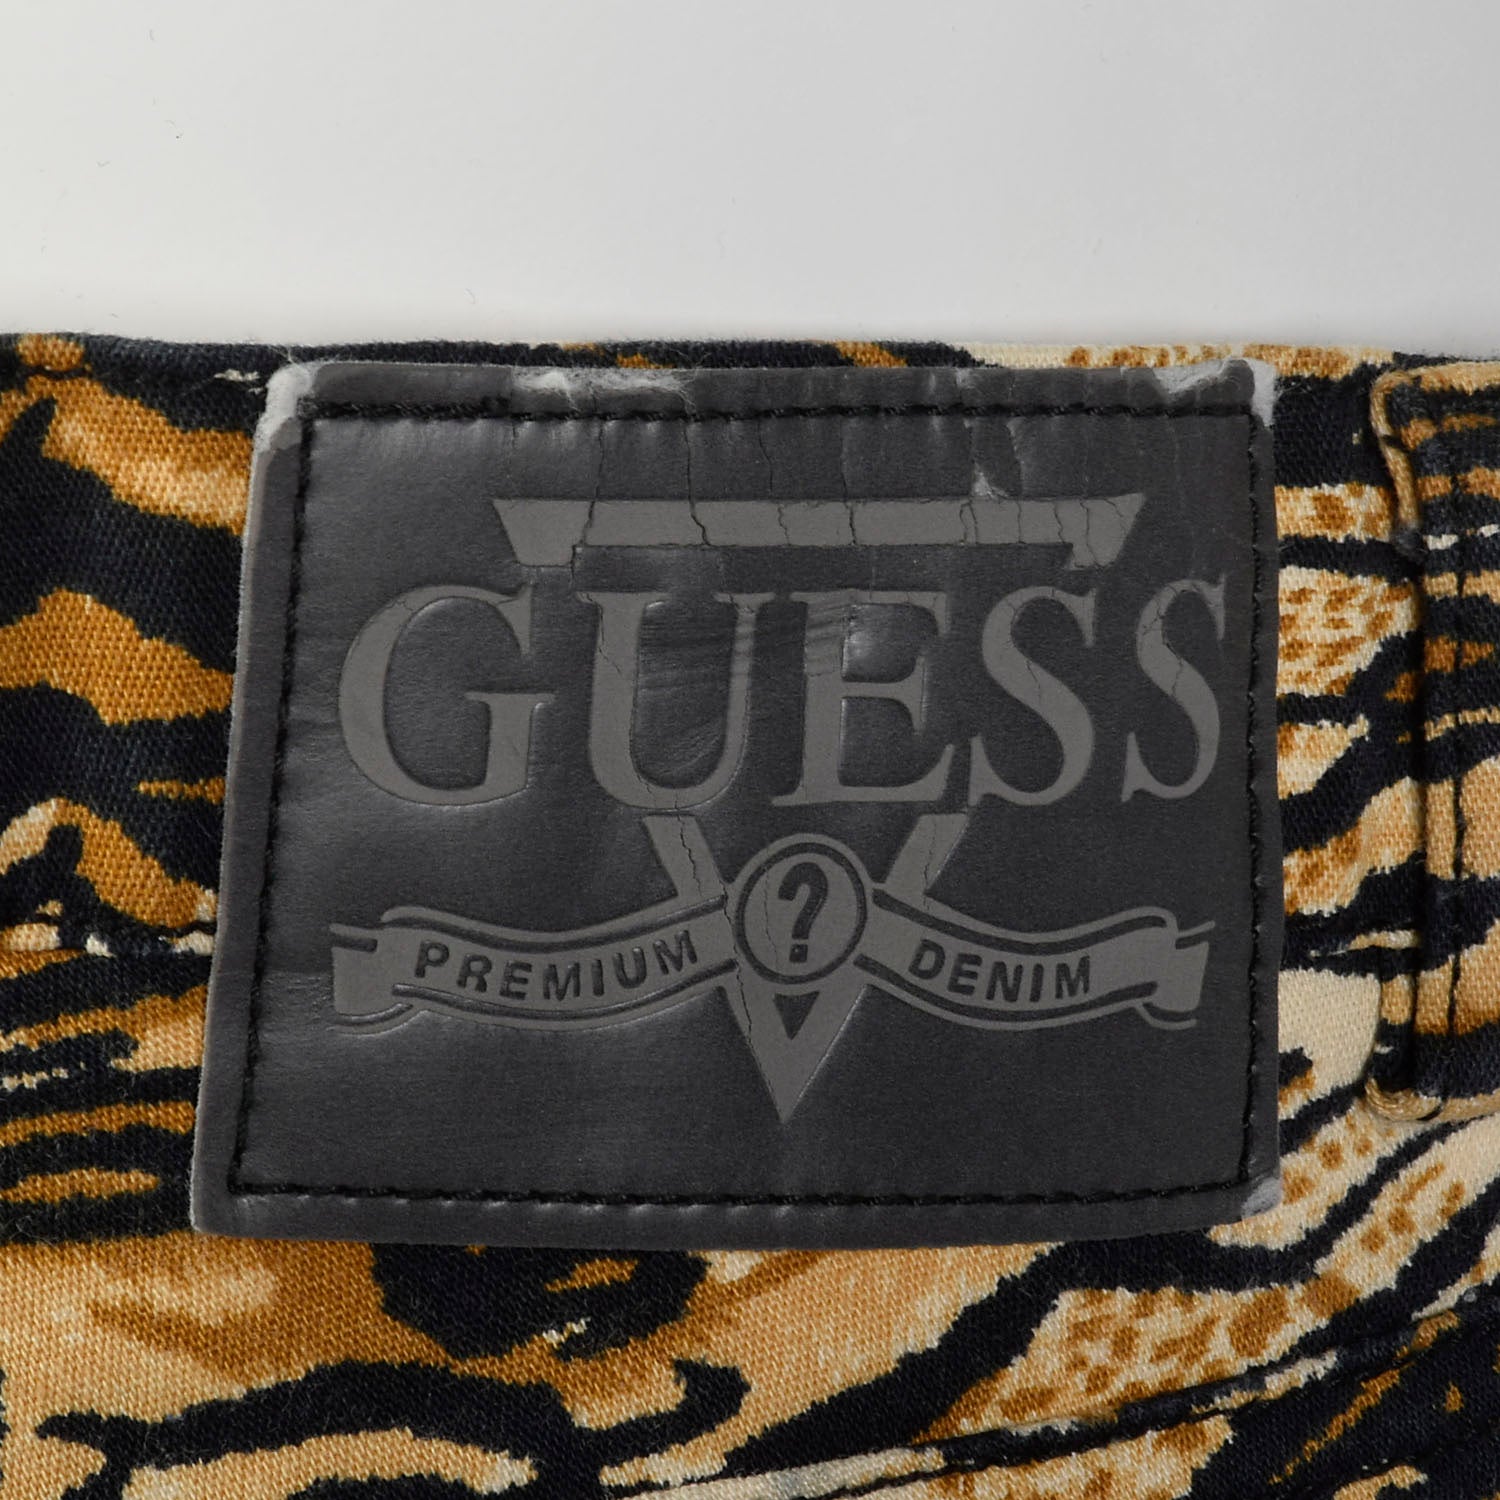 Small Guess Jeans Tiger Stripe Pants Mid Rise Cotton Animal Print